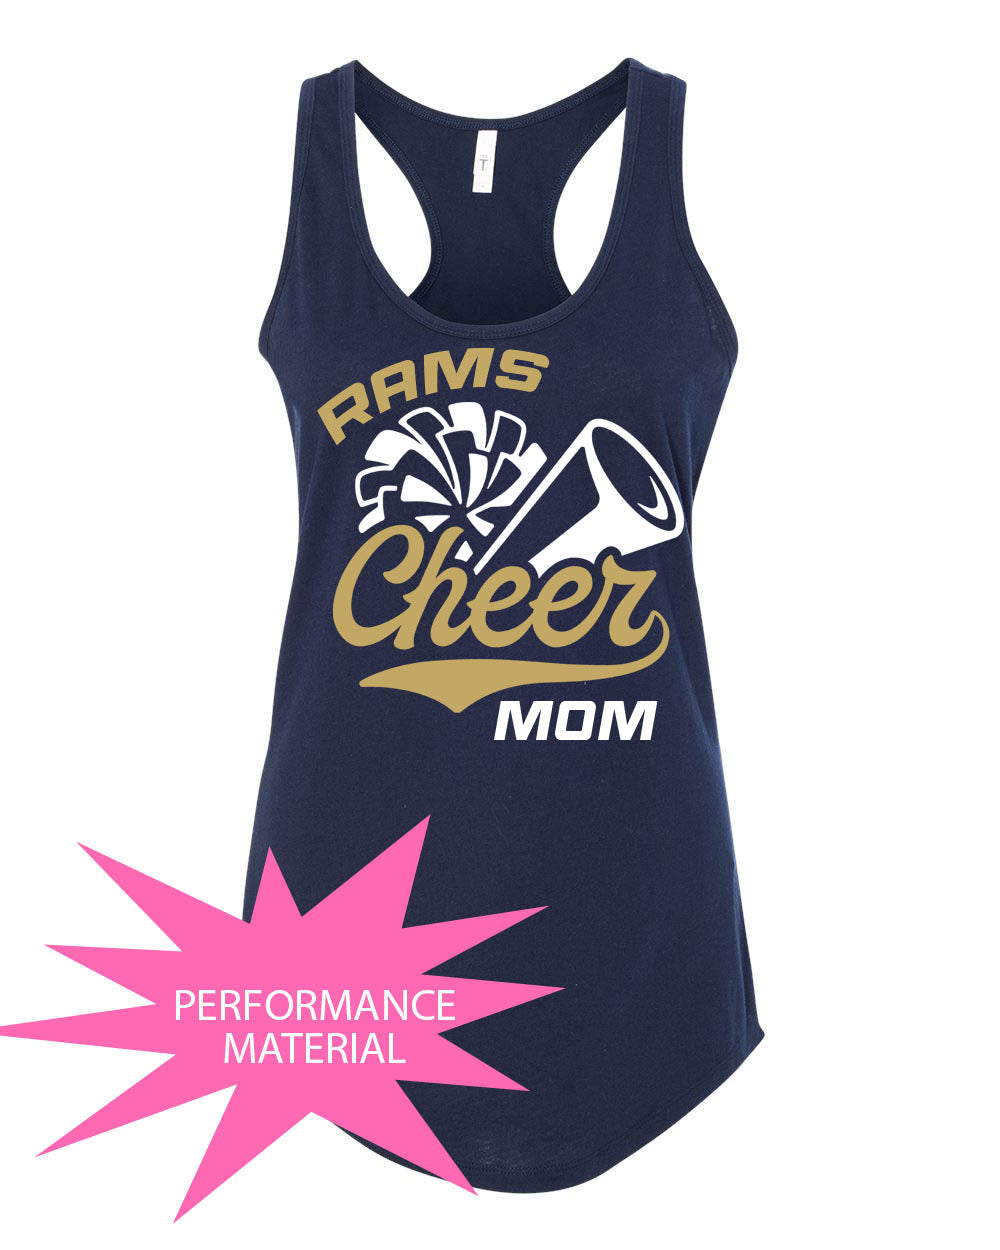 Sussex Middle Cheer Performance Racerback Tank Top Design 1